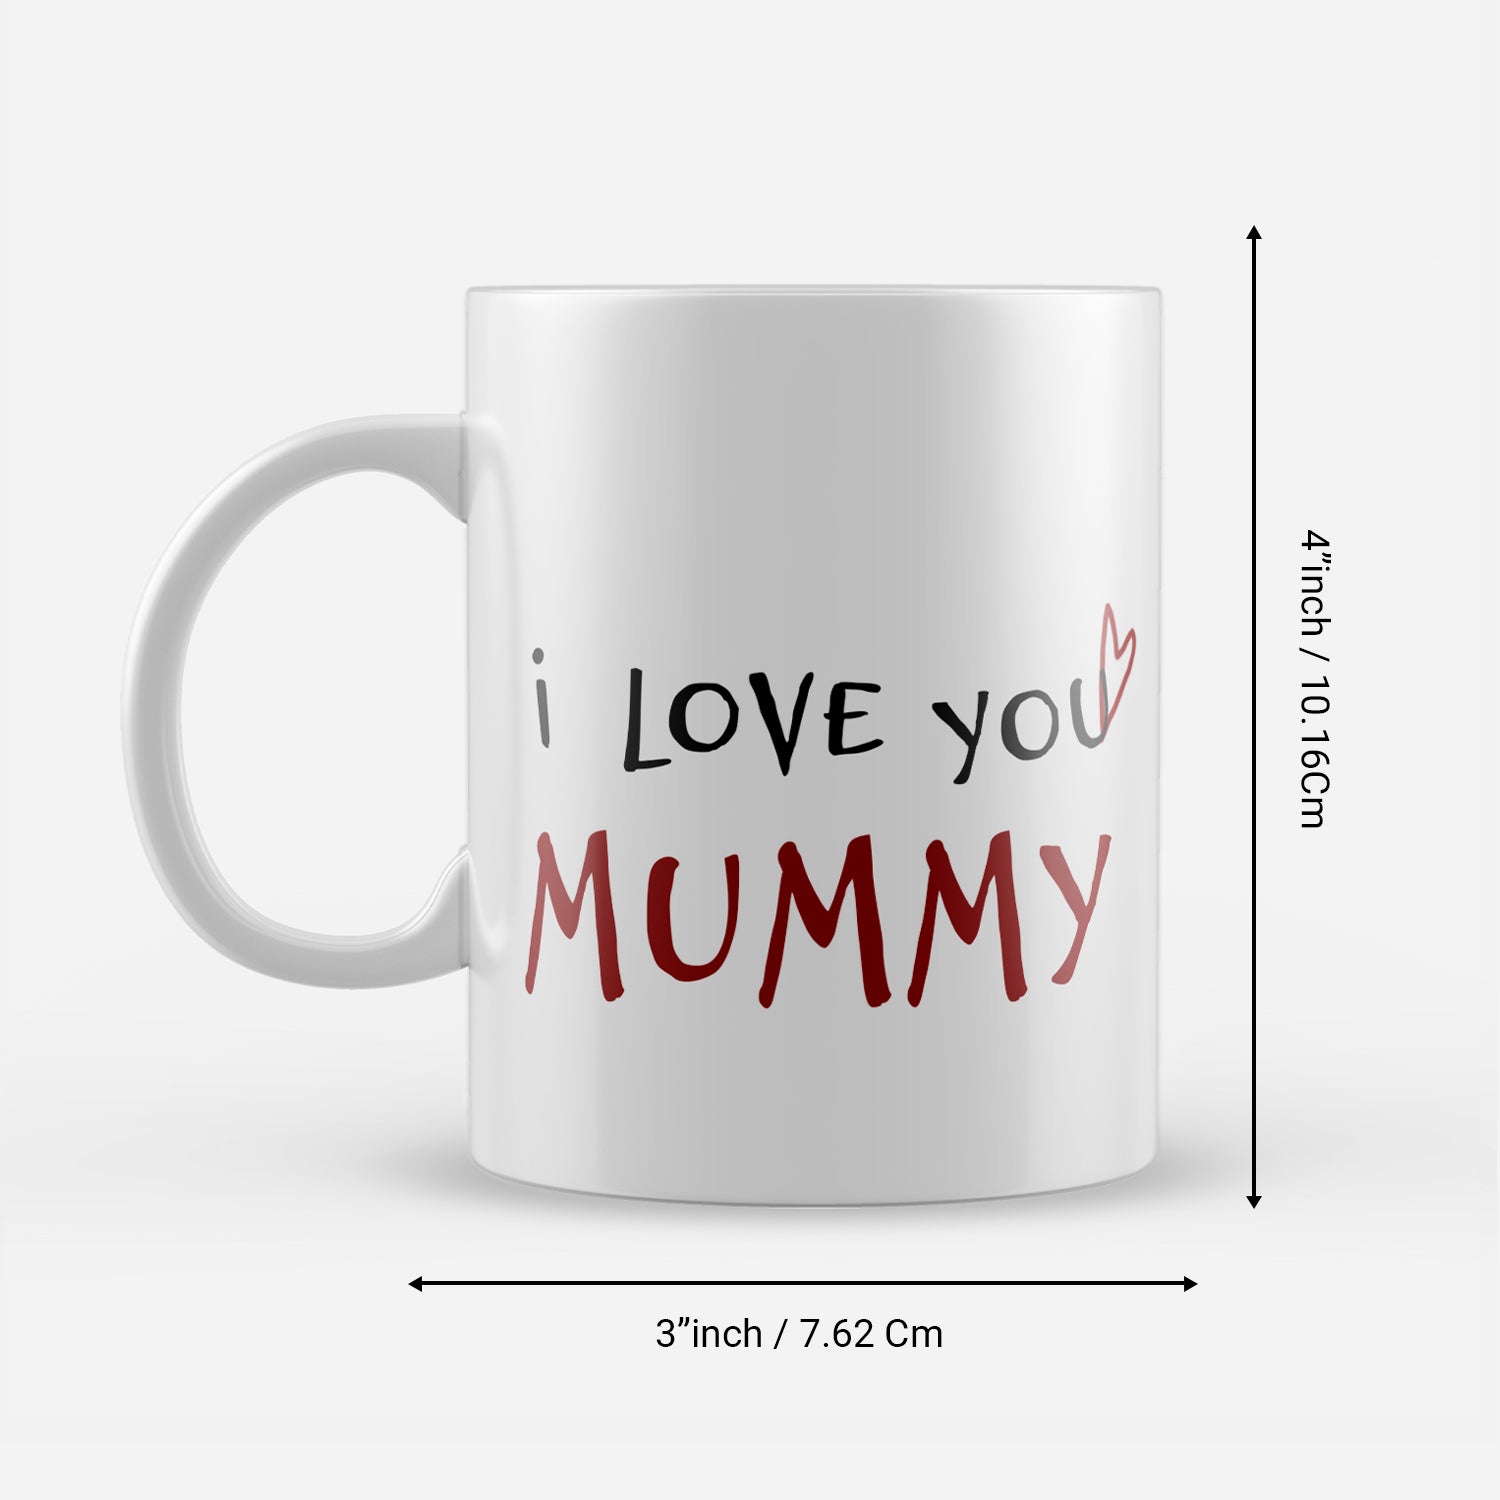 "I Love you Mommy" Mother's Day theme Ceramic Coffee Mugs 3